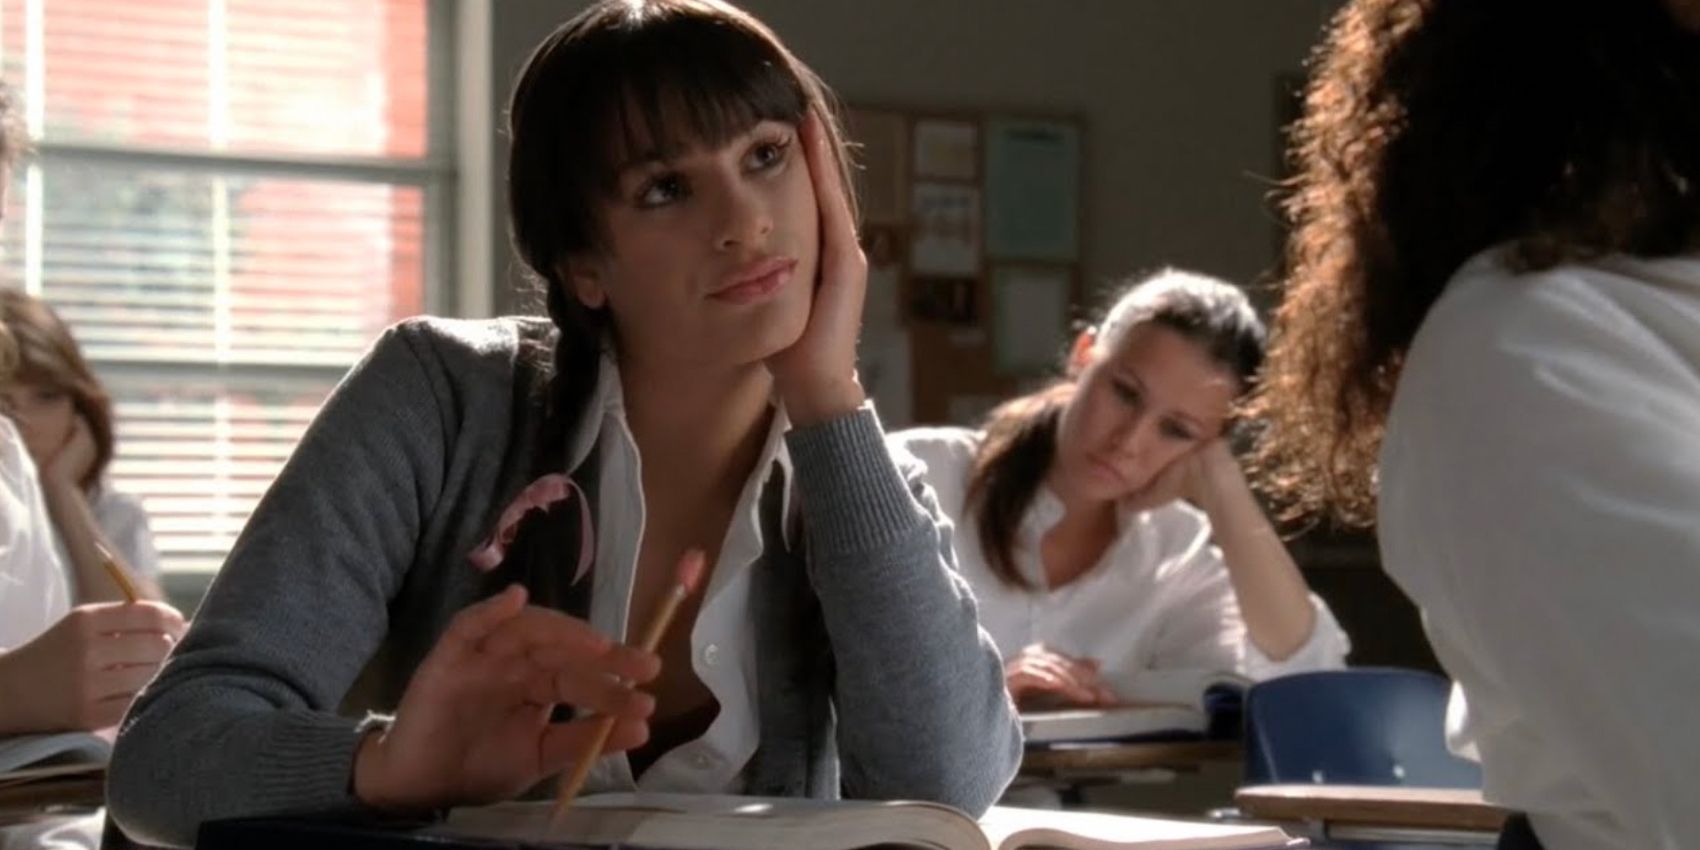 Rachel in her &quot;Baby One More Time&quot; outfit in class in Glee